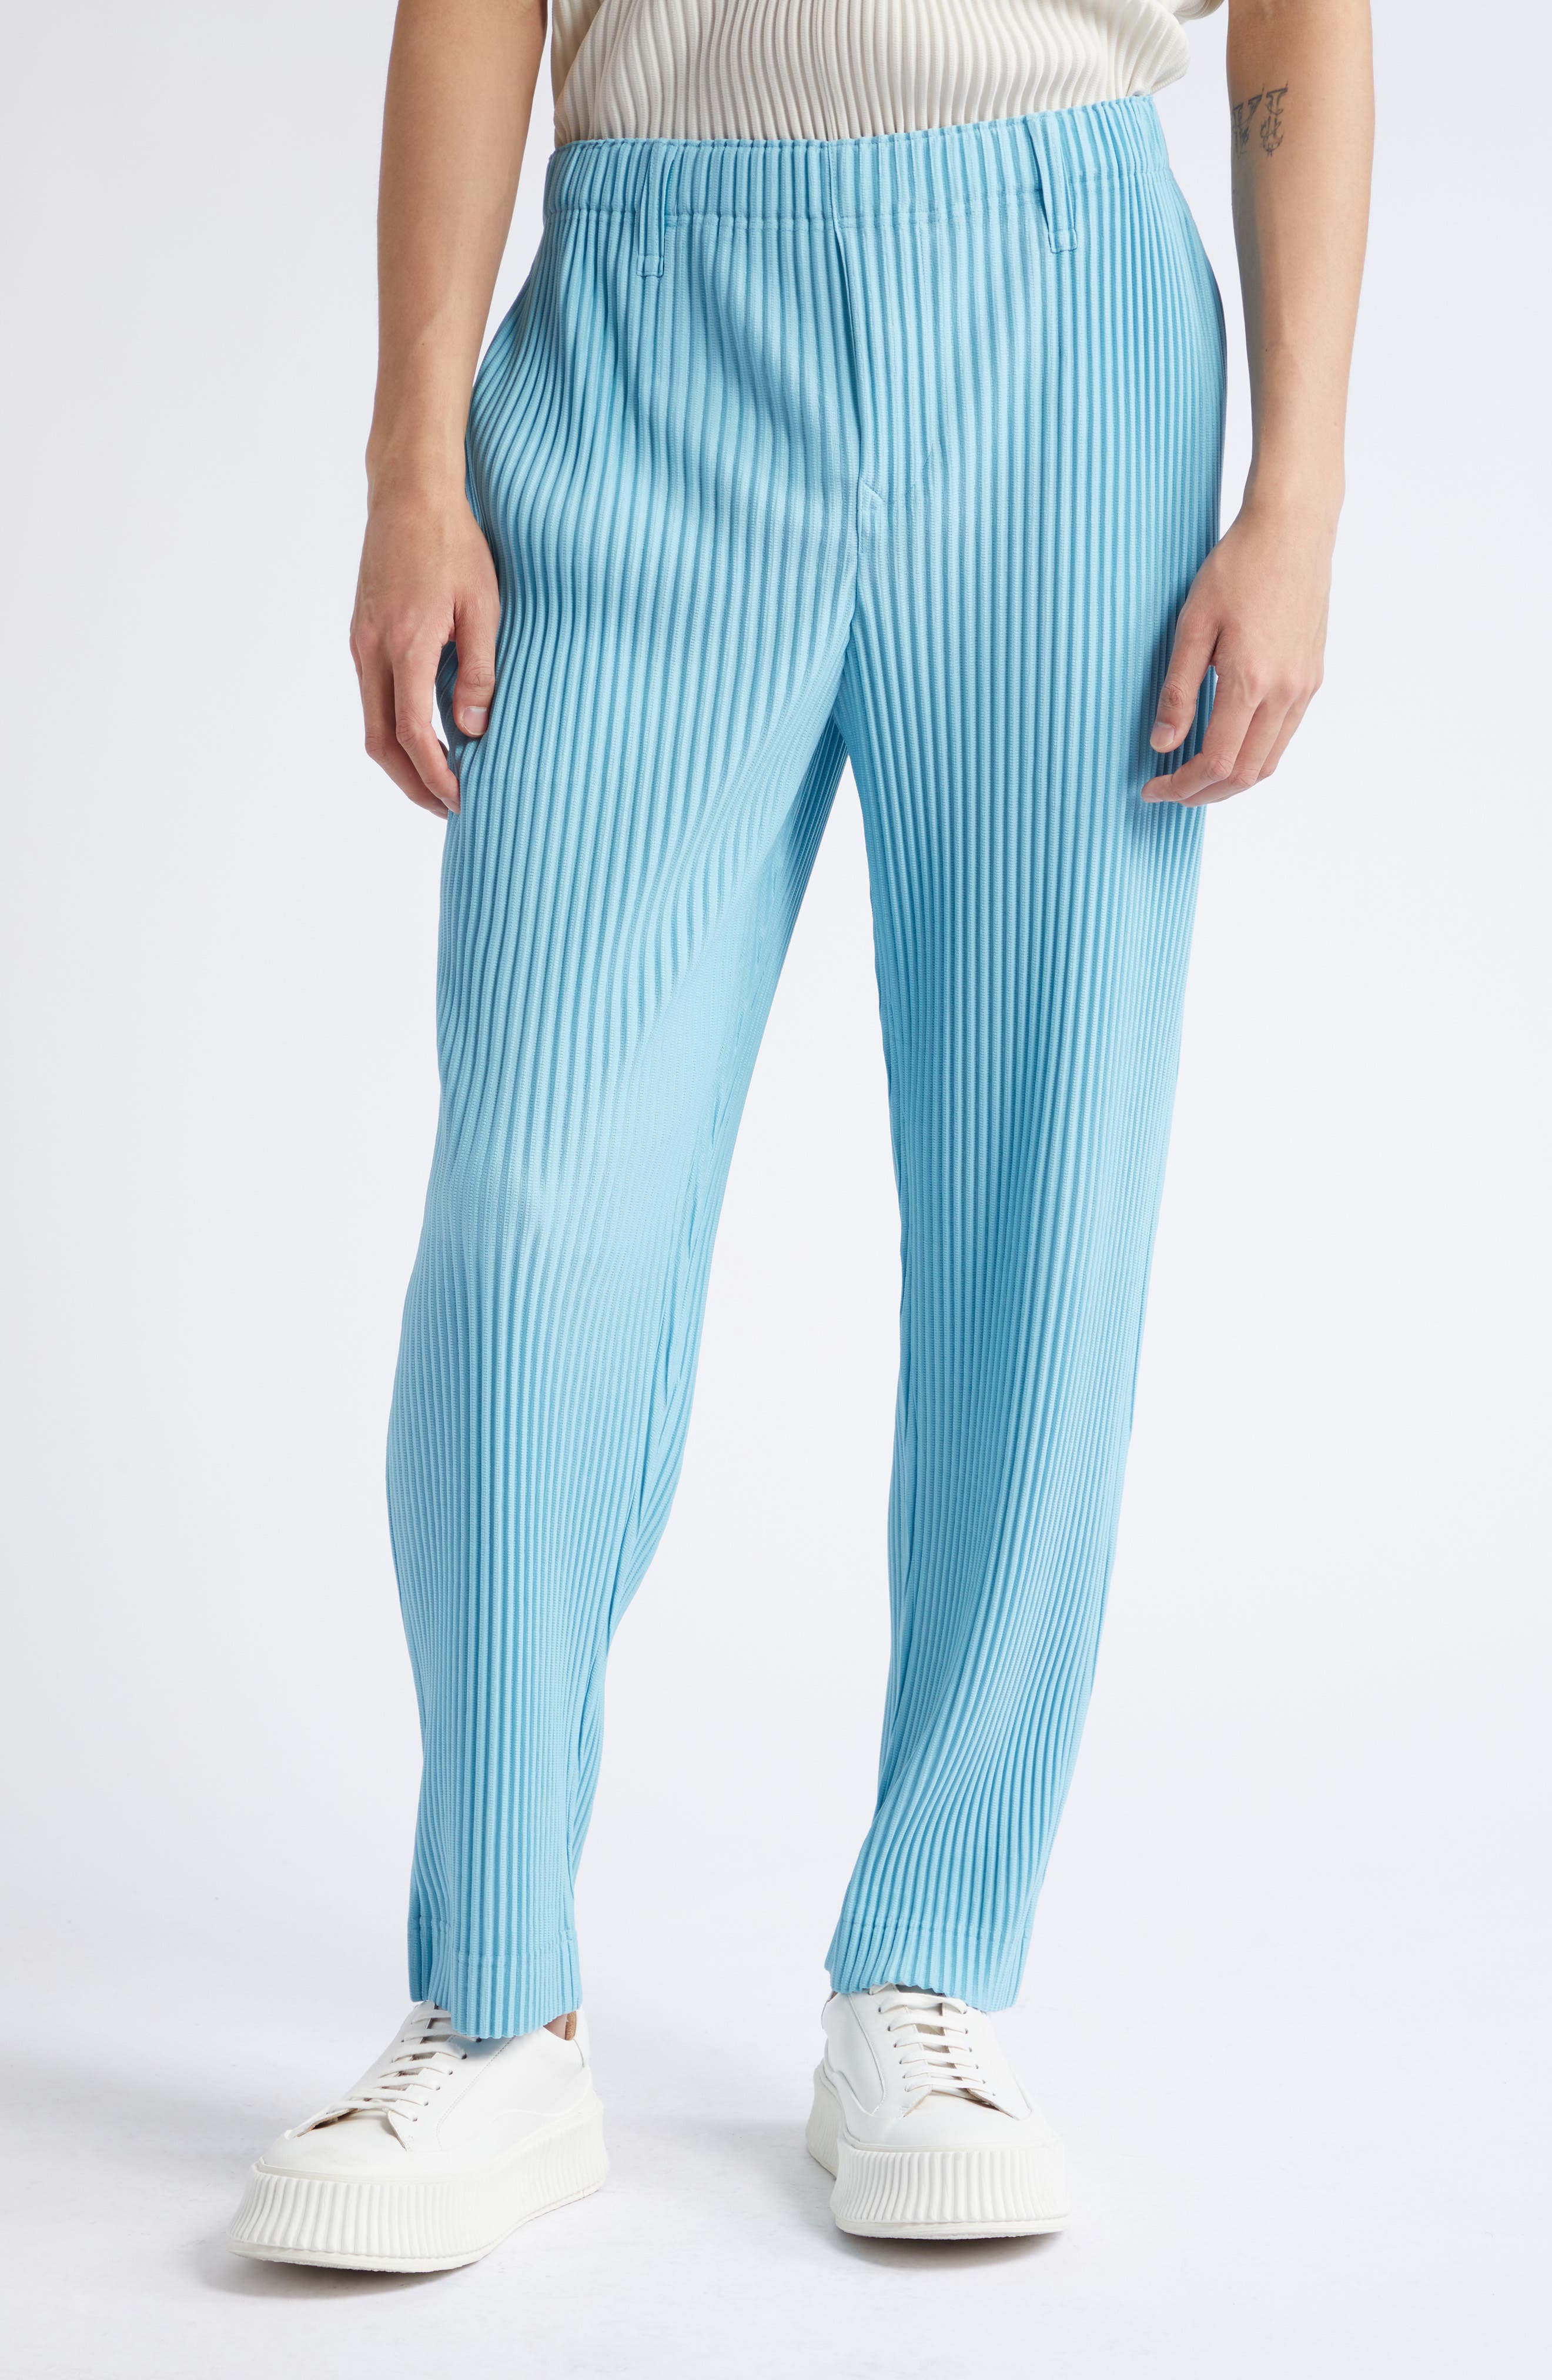 Homme Plissé Issey Miyake Monthly Colors Pleated Pants in 71-Aqua